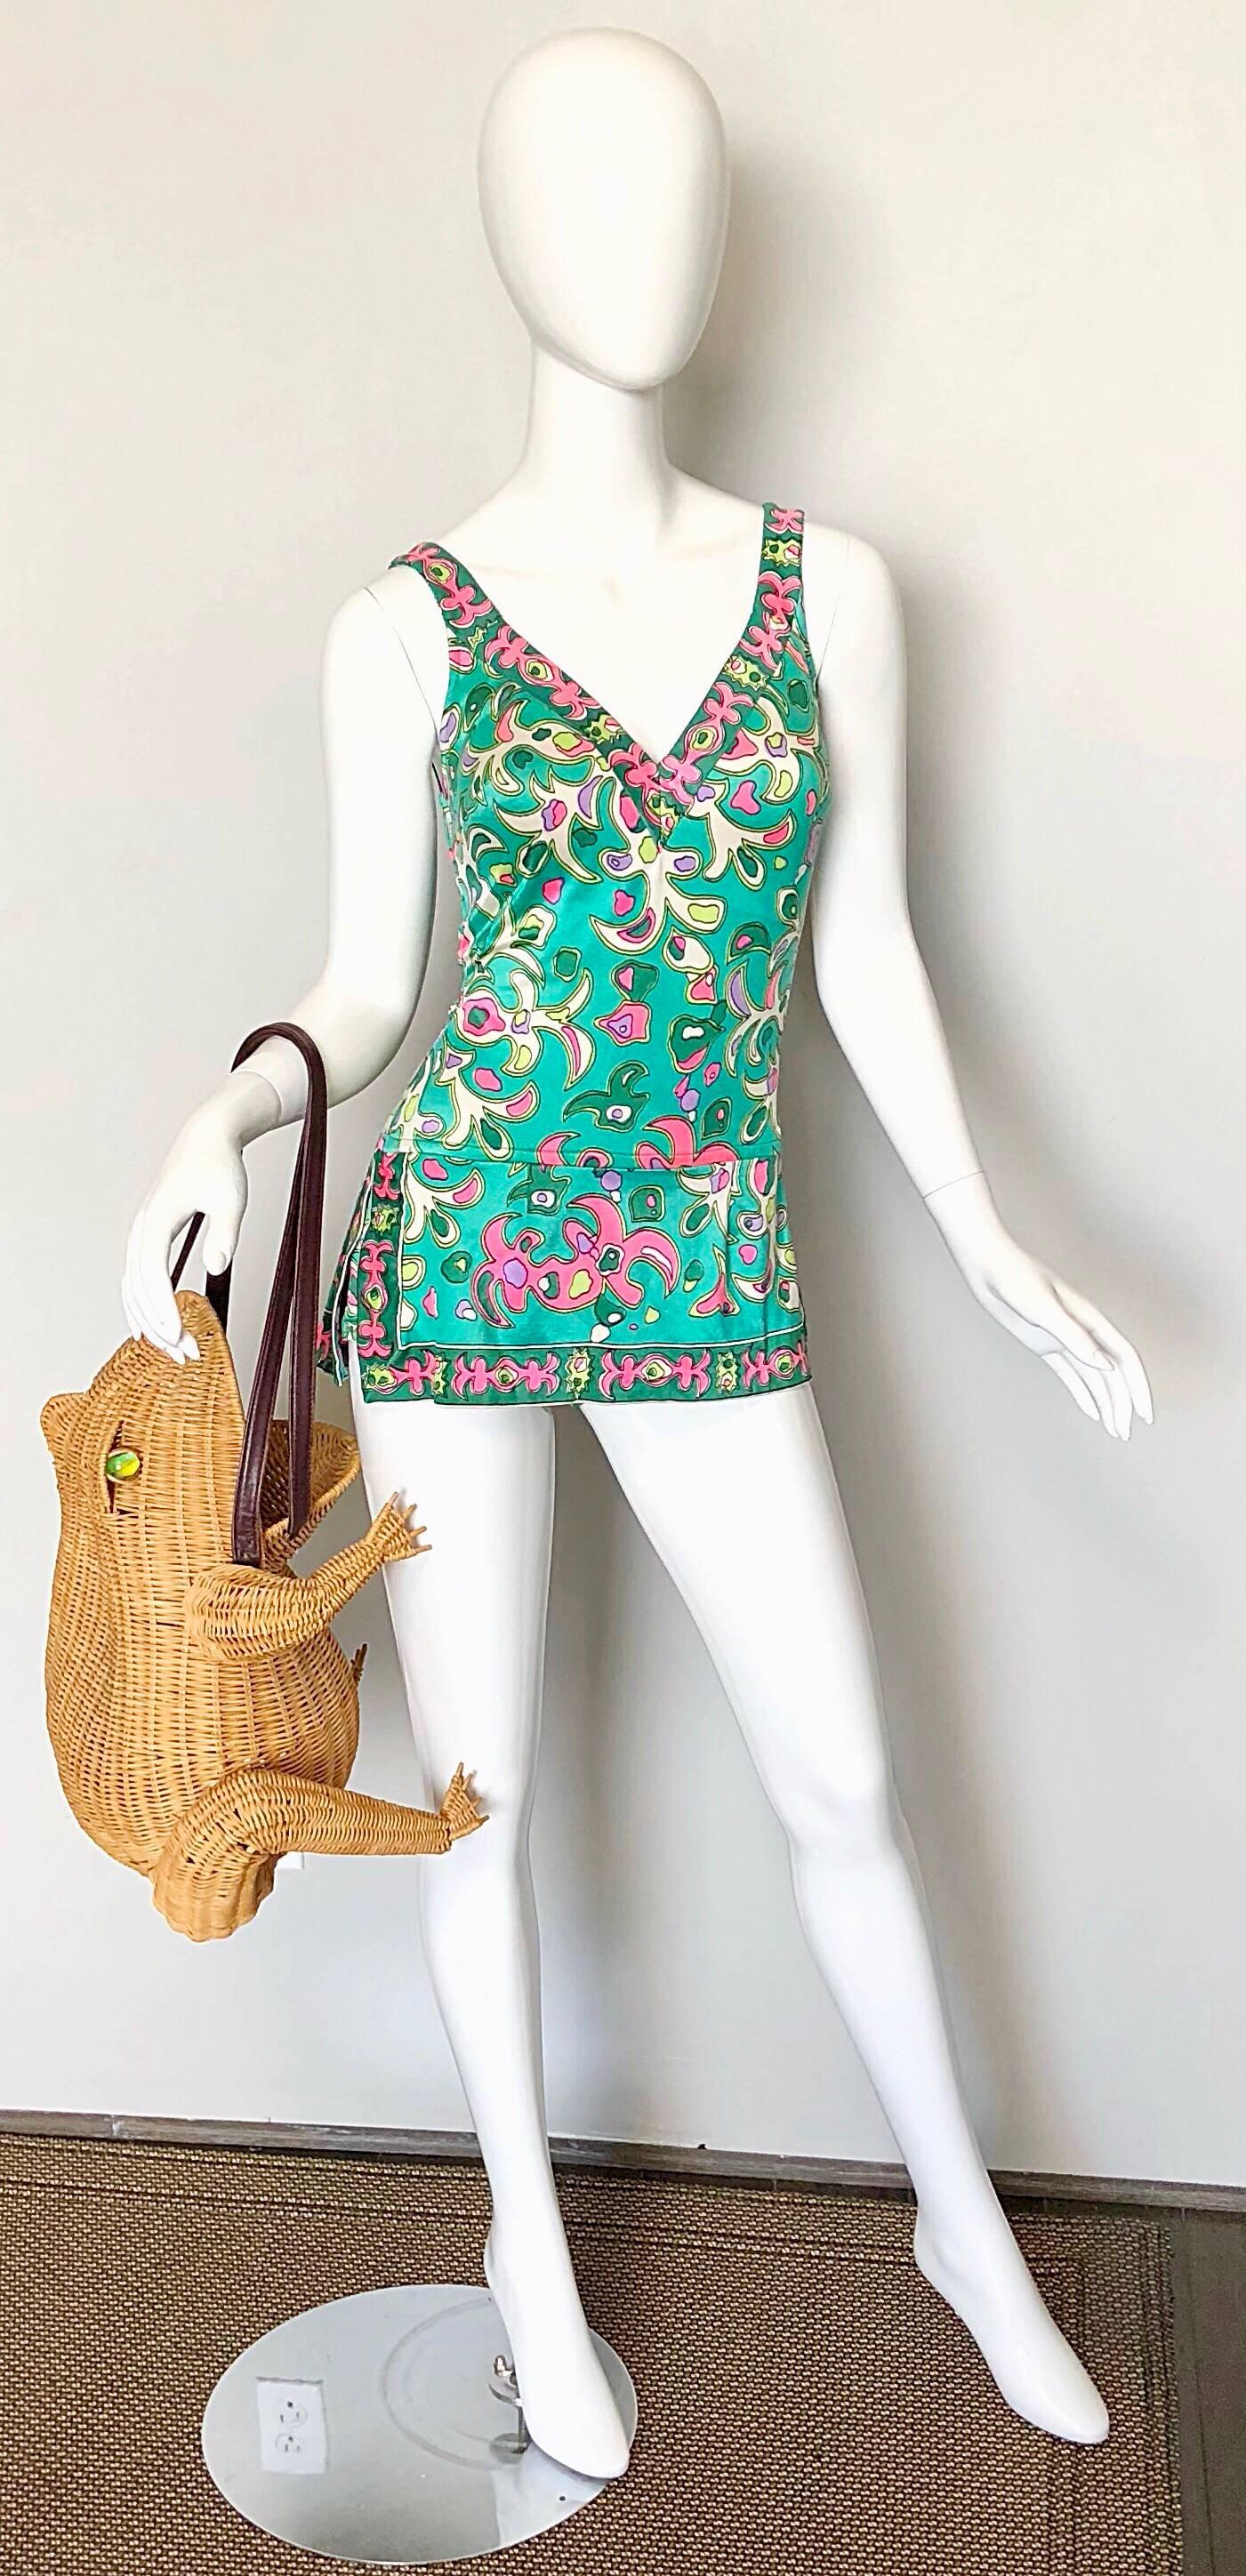 Amazing 1960s sea foam green, pink, kelly green, lime green and white one piece romper swimsuit ! Features a Pucci esque print throughout. Fabric covered buttons on each shoulder strap can adjust strap length. Attached flattering skirt has a slit at